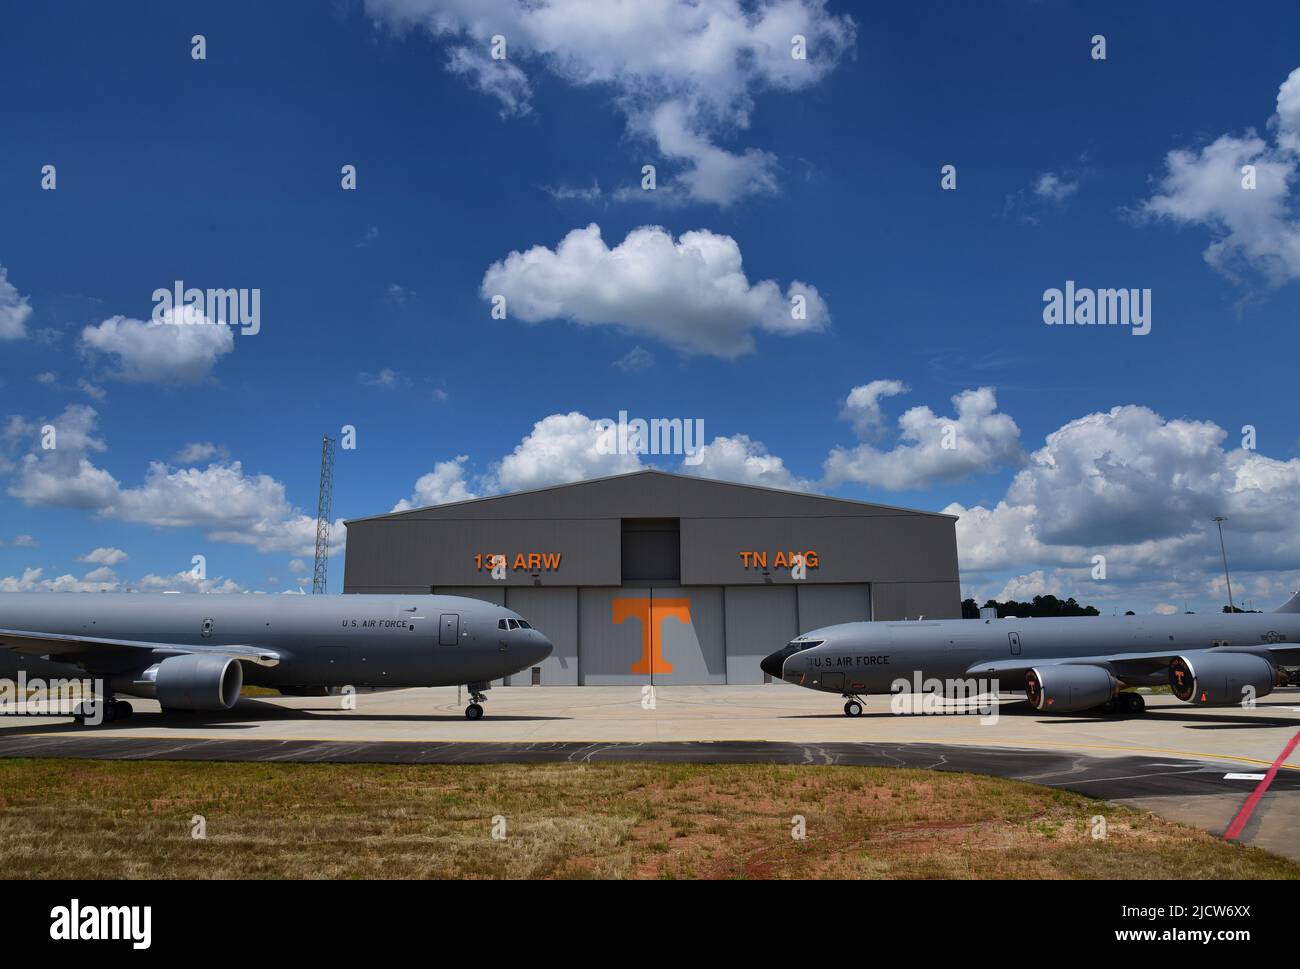 A KC-135R Stratotanker and a KC-46A Pregasus, both aerial refueling aircraft, sit in front of the new $31 million aircraft maintenance hangar at the 134th Air Refueling Wing, McGhee Tyson ANG Base, Tennessee.  The grand opening of the new hangar was held on Jun. 3, with Airmen and community members present for the event. Stock Photo